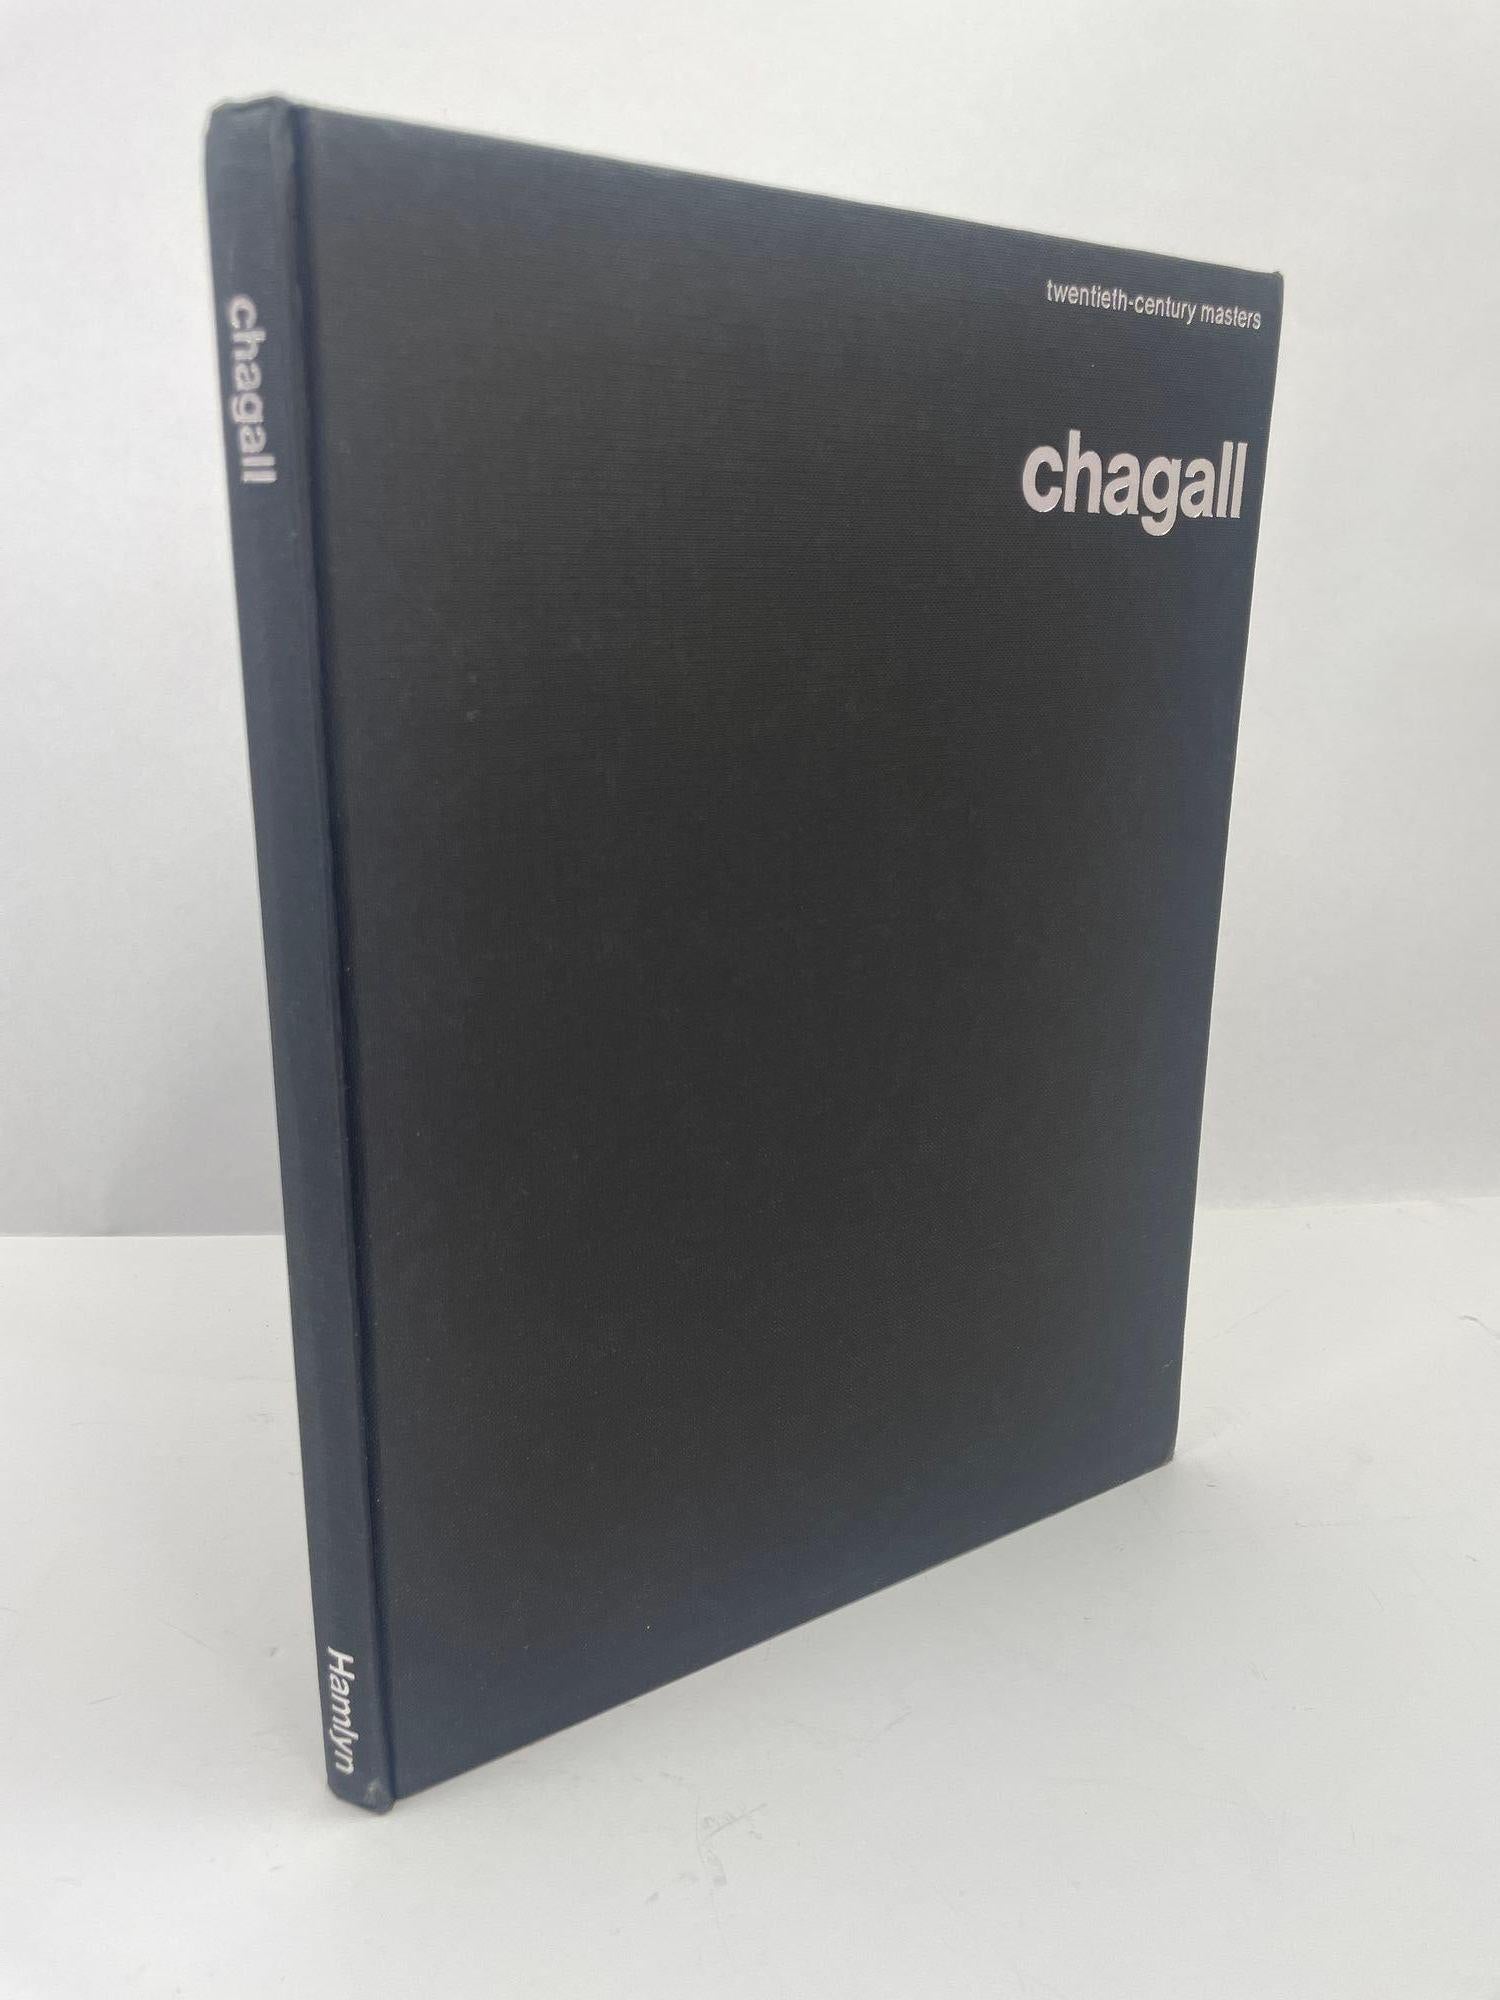 Chagall; (Twentieth-century masters) Hardcover – January 1, 1971 by Marc Bucci, Mario; Chagall (Author).
Text: English, Italian (translation).
94 pages, Hardcover.
First published January 1, 1971.
Format 94 pages, Hardcover.
Published: January 1,